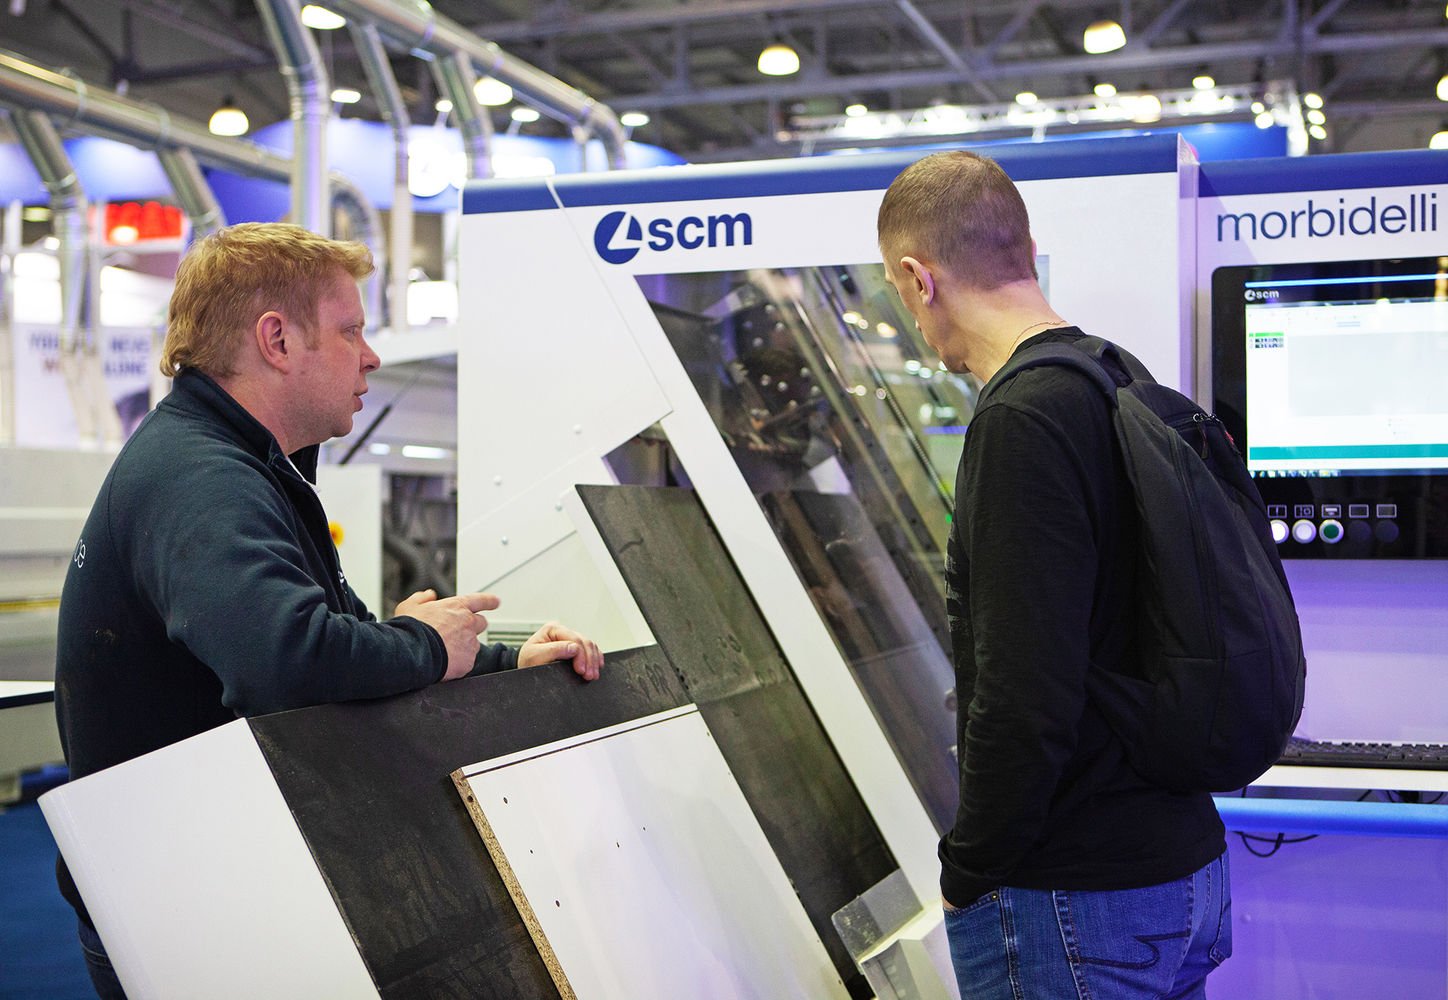 Woodex, day 2: the SCM team welcomes journalists and visitors for a “total touch experience”